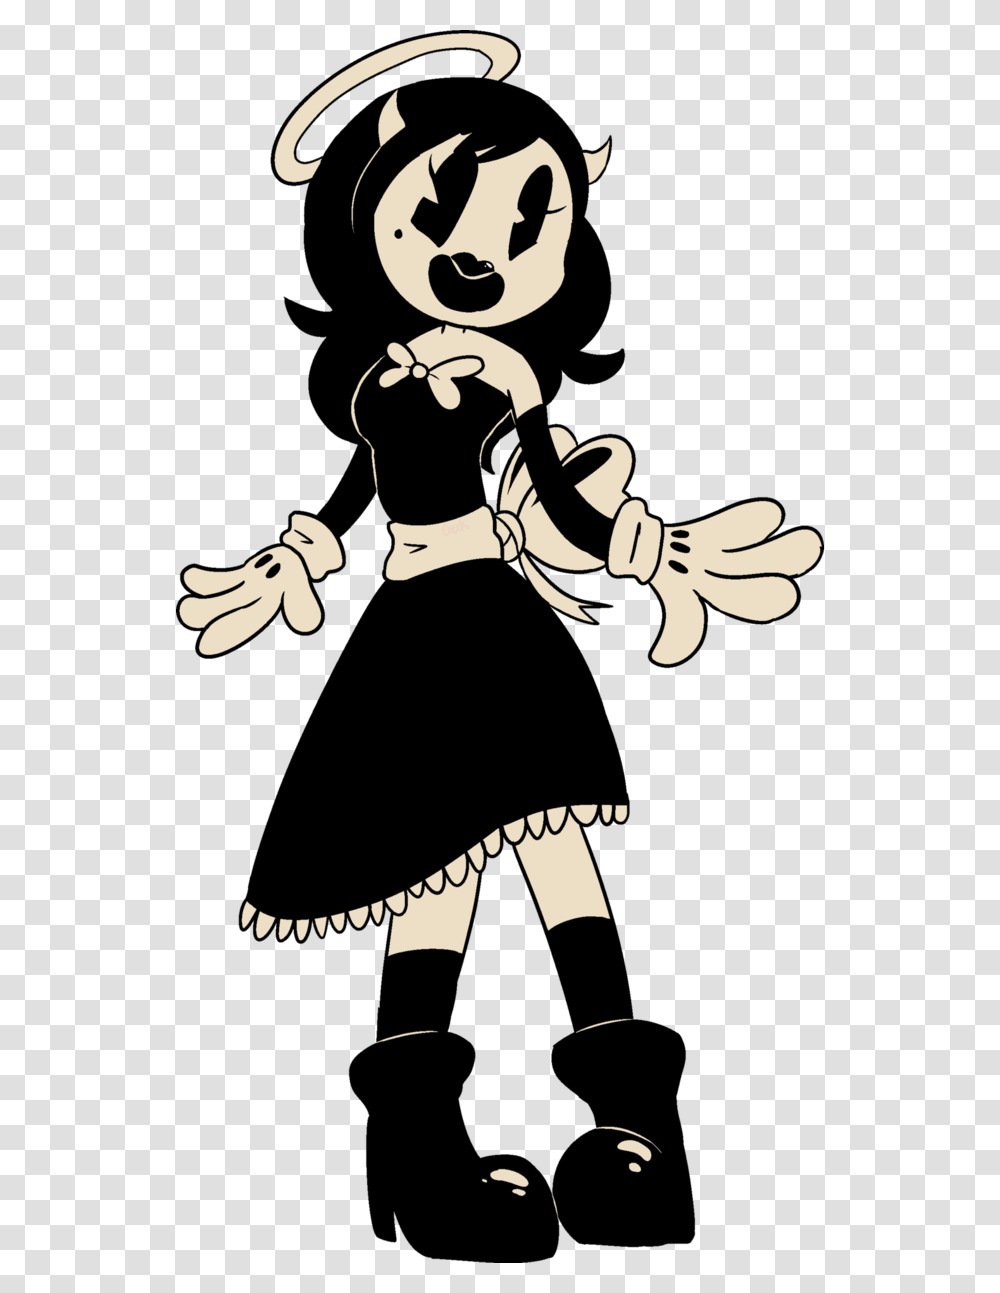 A Crossover Fanfic Roleplay Batim Alice The Angel, Poster, Hand, Performer, Pirate Transparent Png